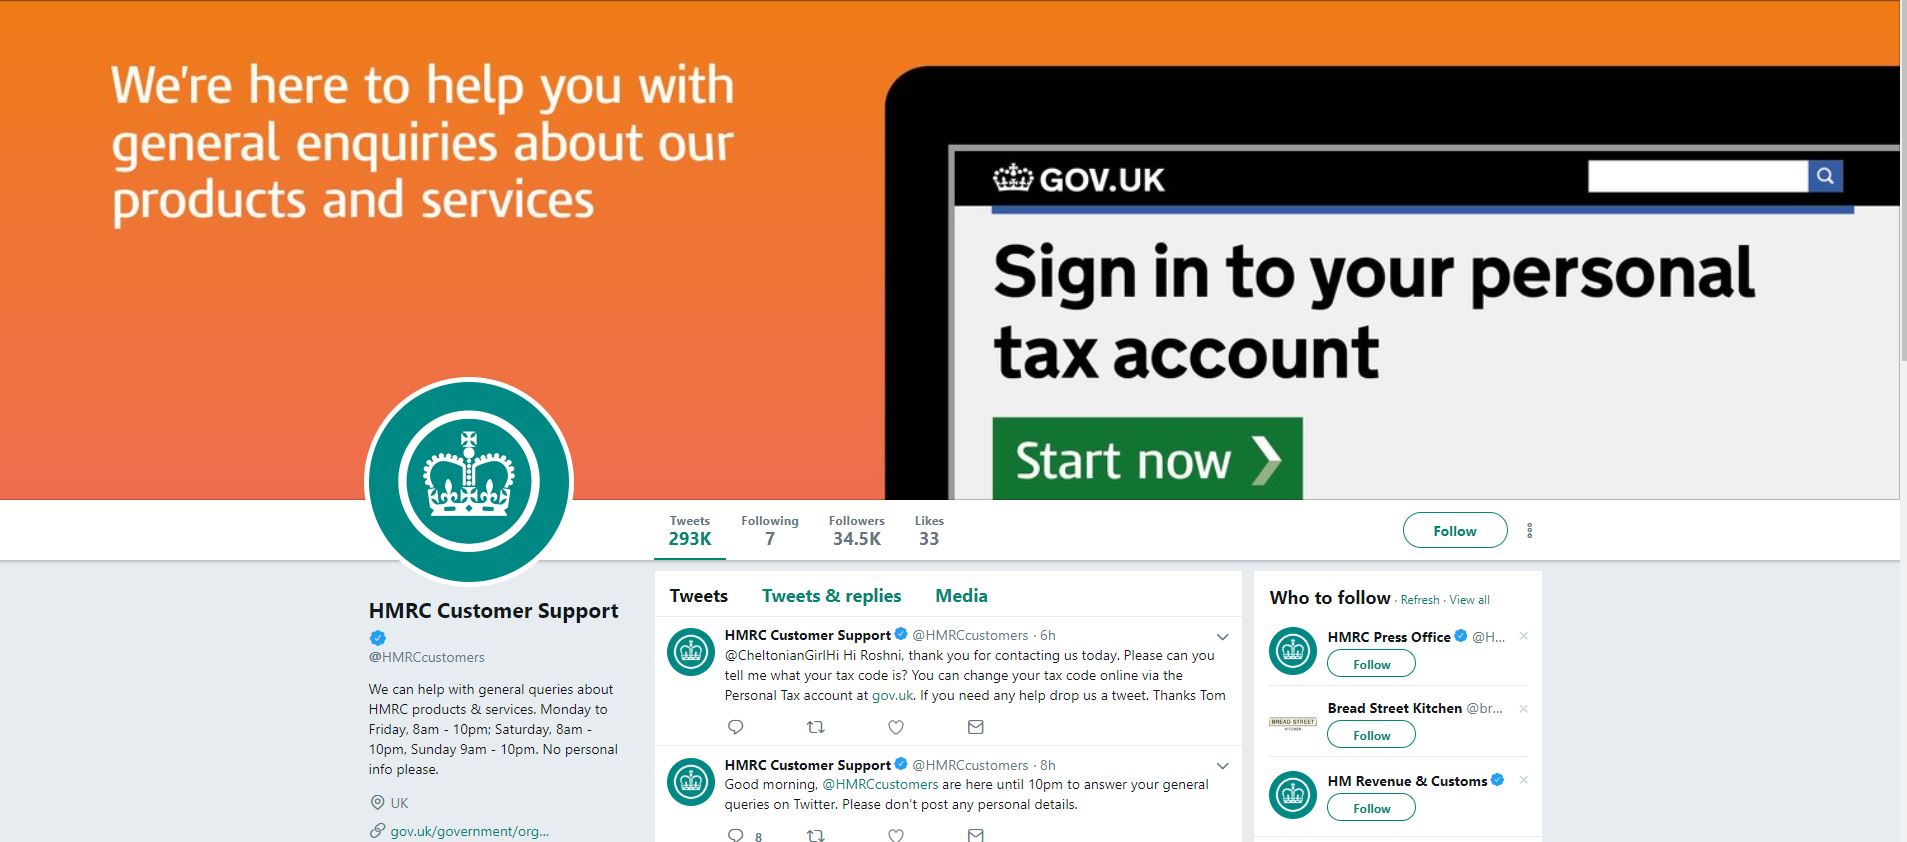 hmrc-online-chat-hmrc-smishing-tax-scam-targets-uk-banking-customers